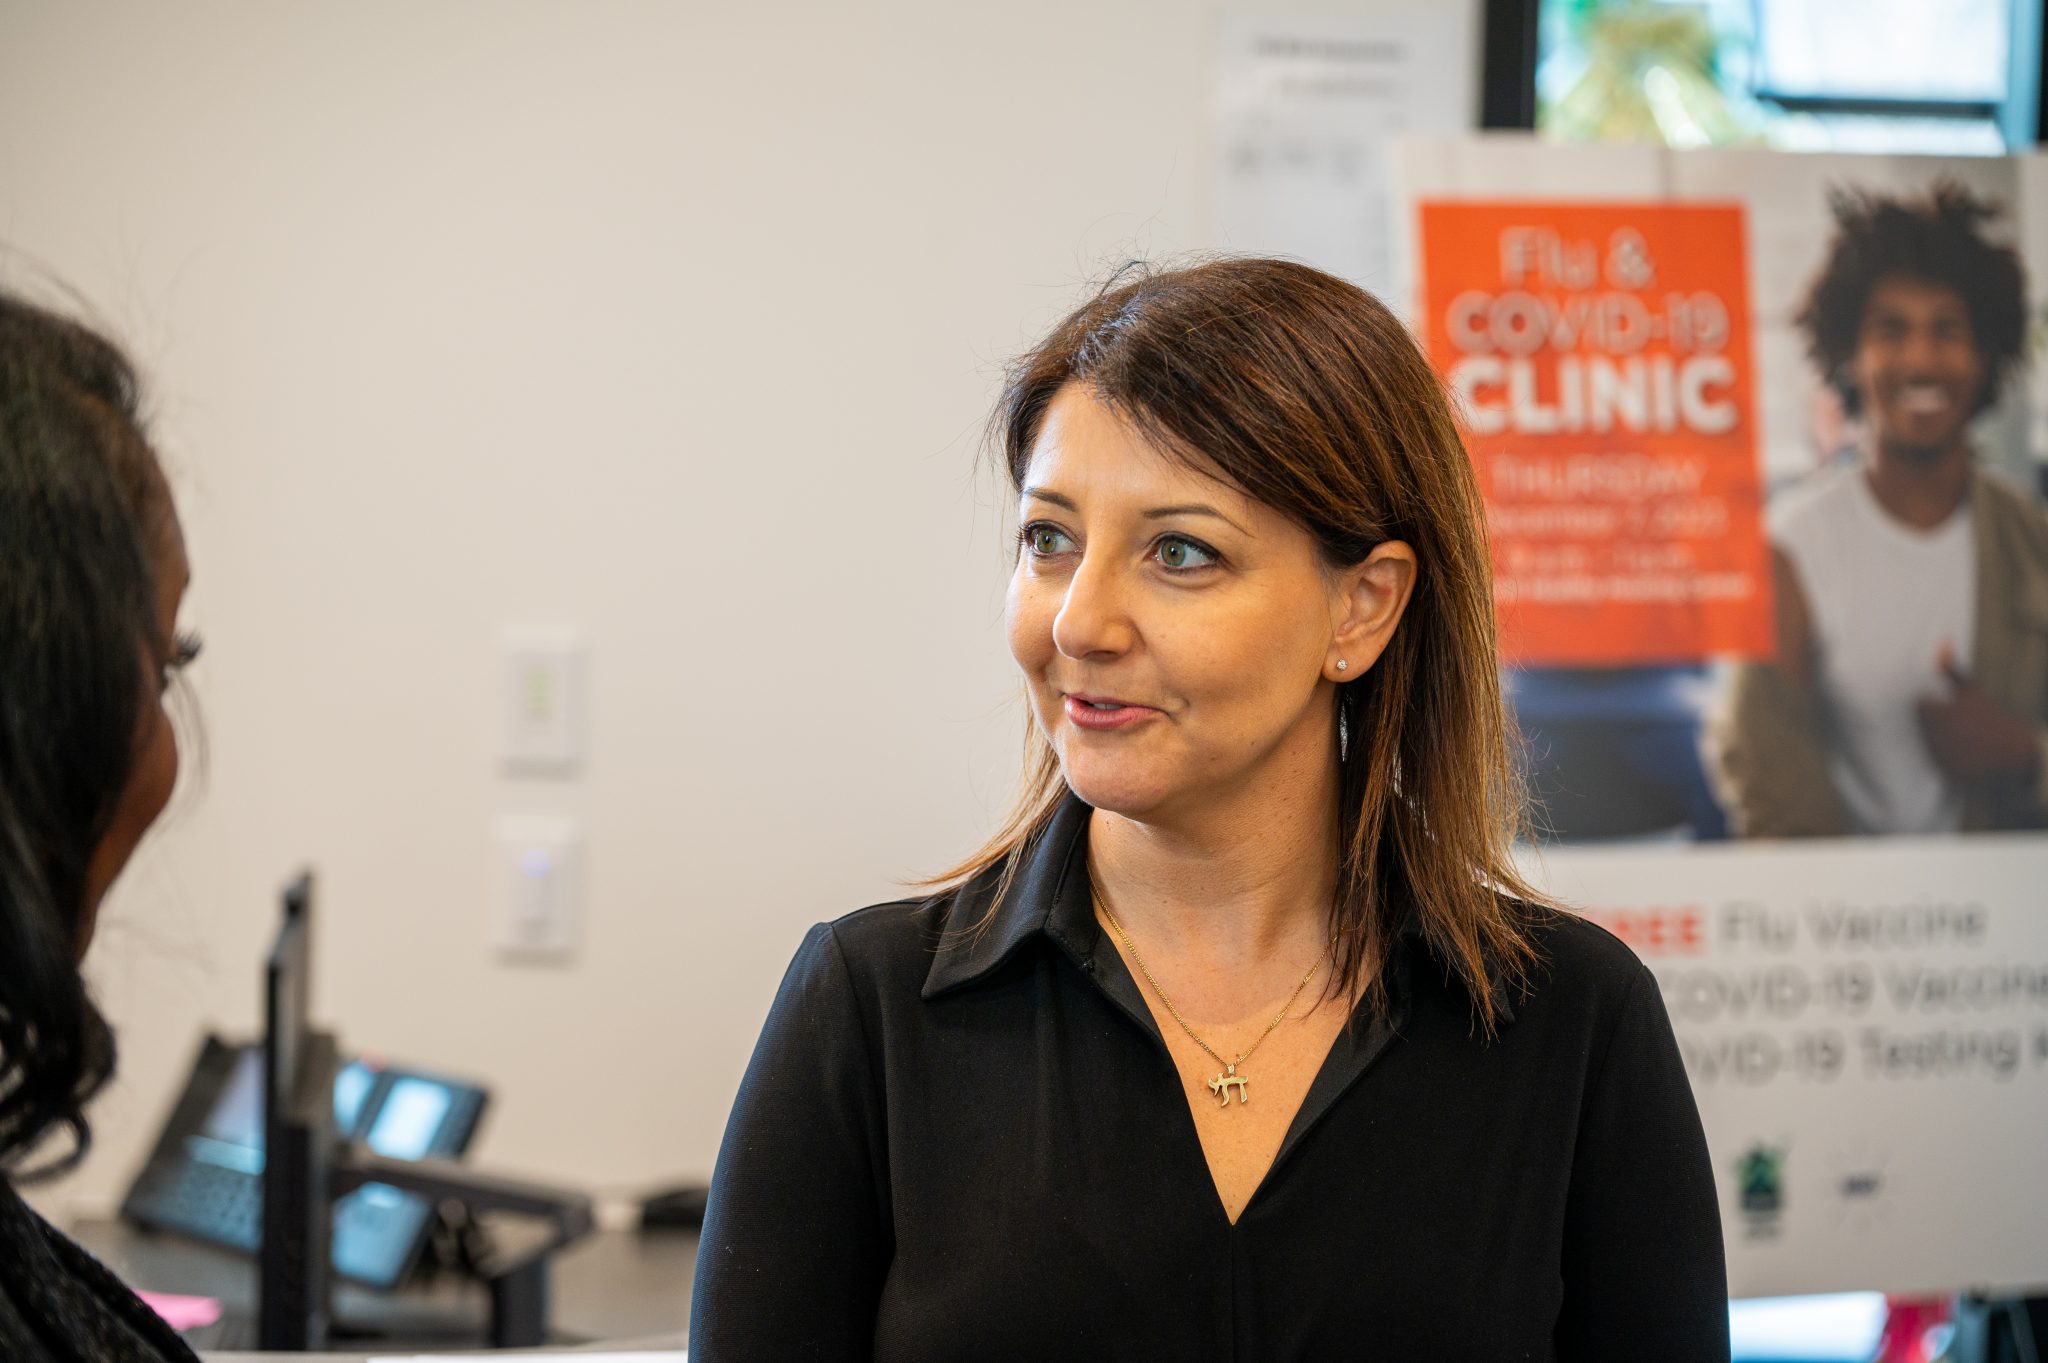 Dr. Mandy Cohen, director of the Centers for Disease Control and Prevention, visited a vaccine clinic in Detroit on Thursday, Dec. 7, 2023, to encourage Michiganders to protect themselves against respiratory illnesses.